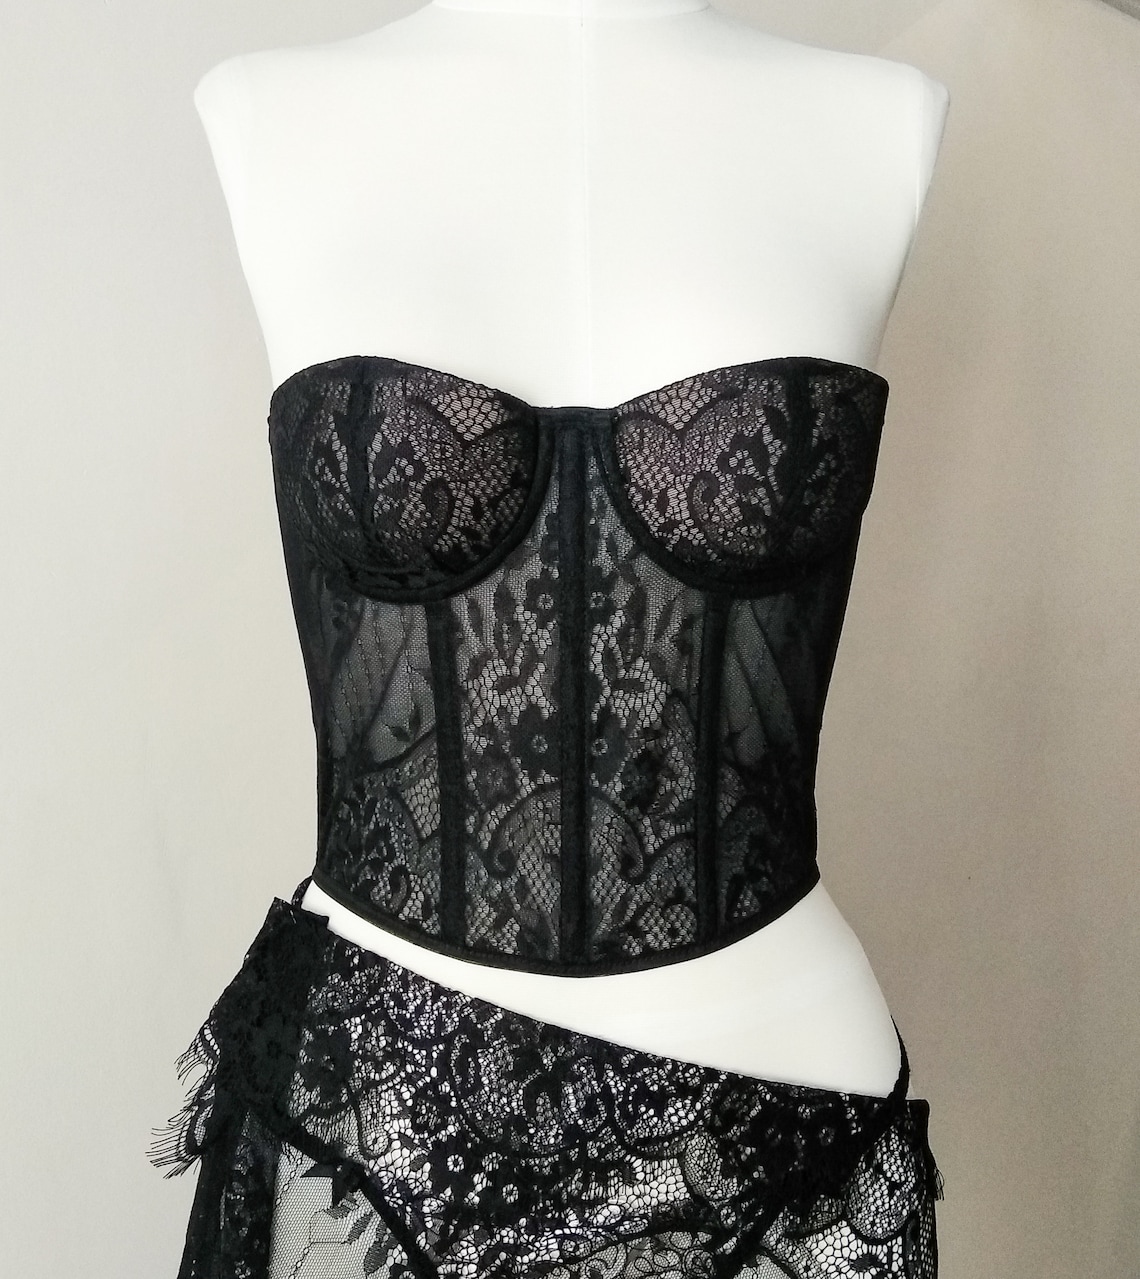 Black lace corset top. Bustier top. Underbust 28-30 inches | Etsy